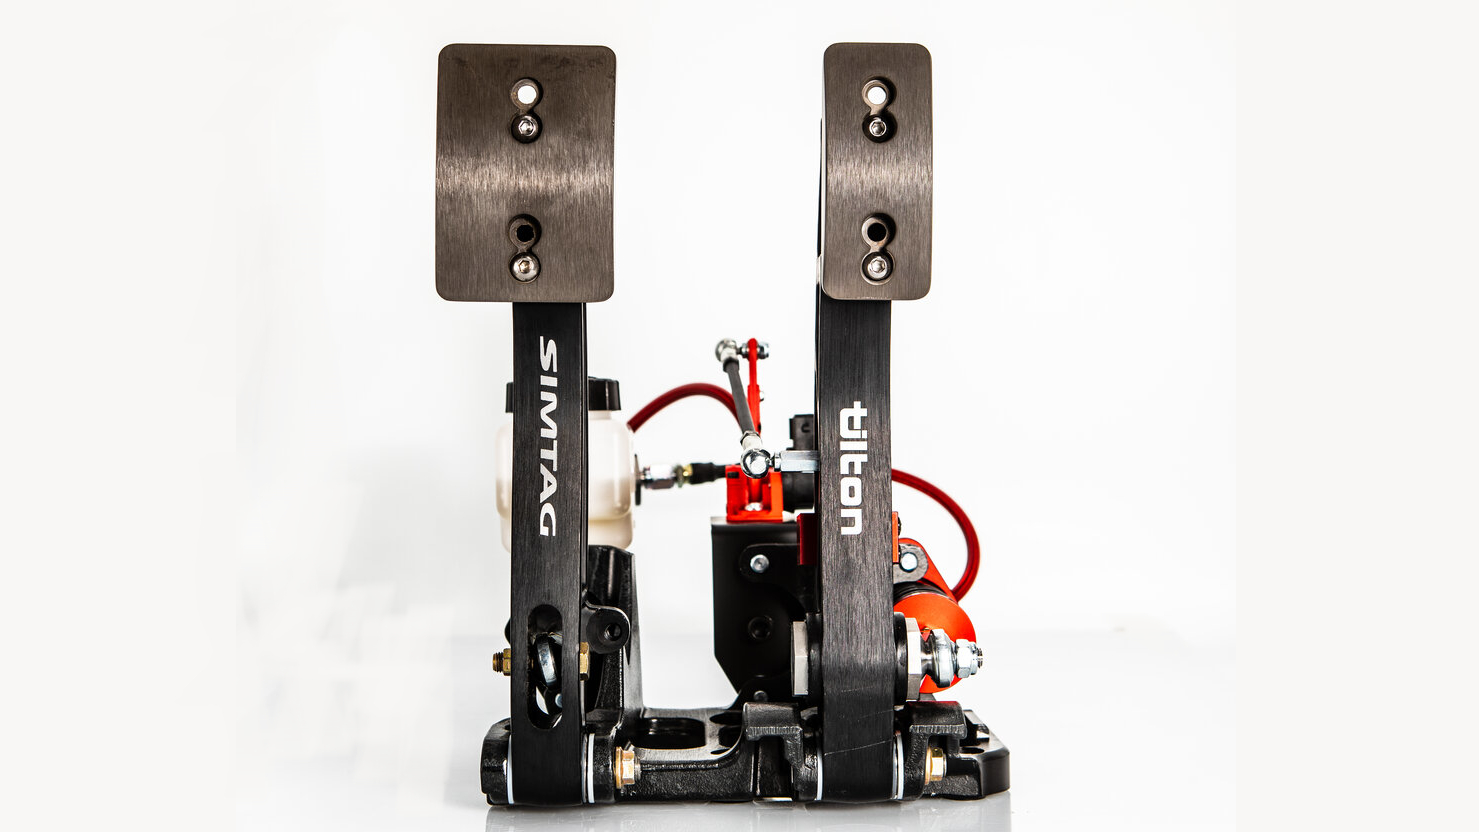 The Simtag Hydraulic 2 Pedal Racer Edition has launched for pre-orders.